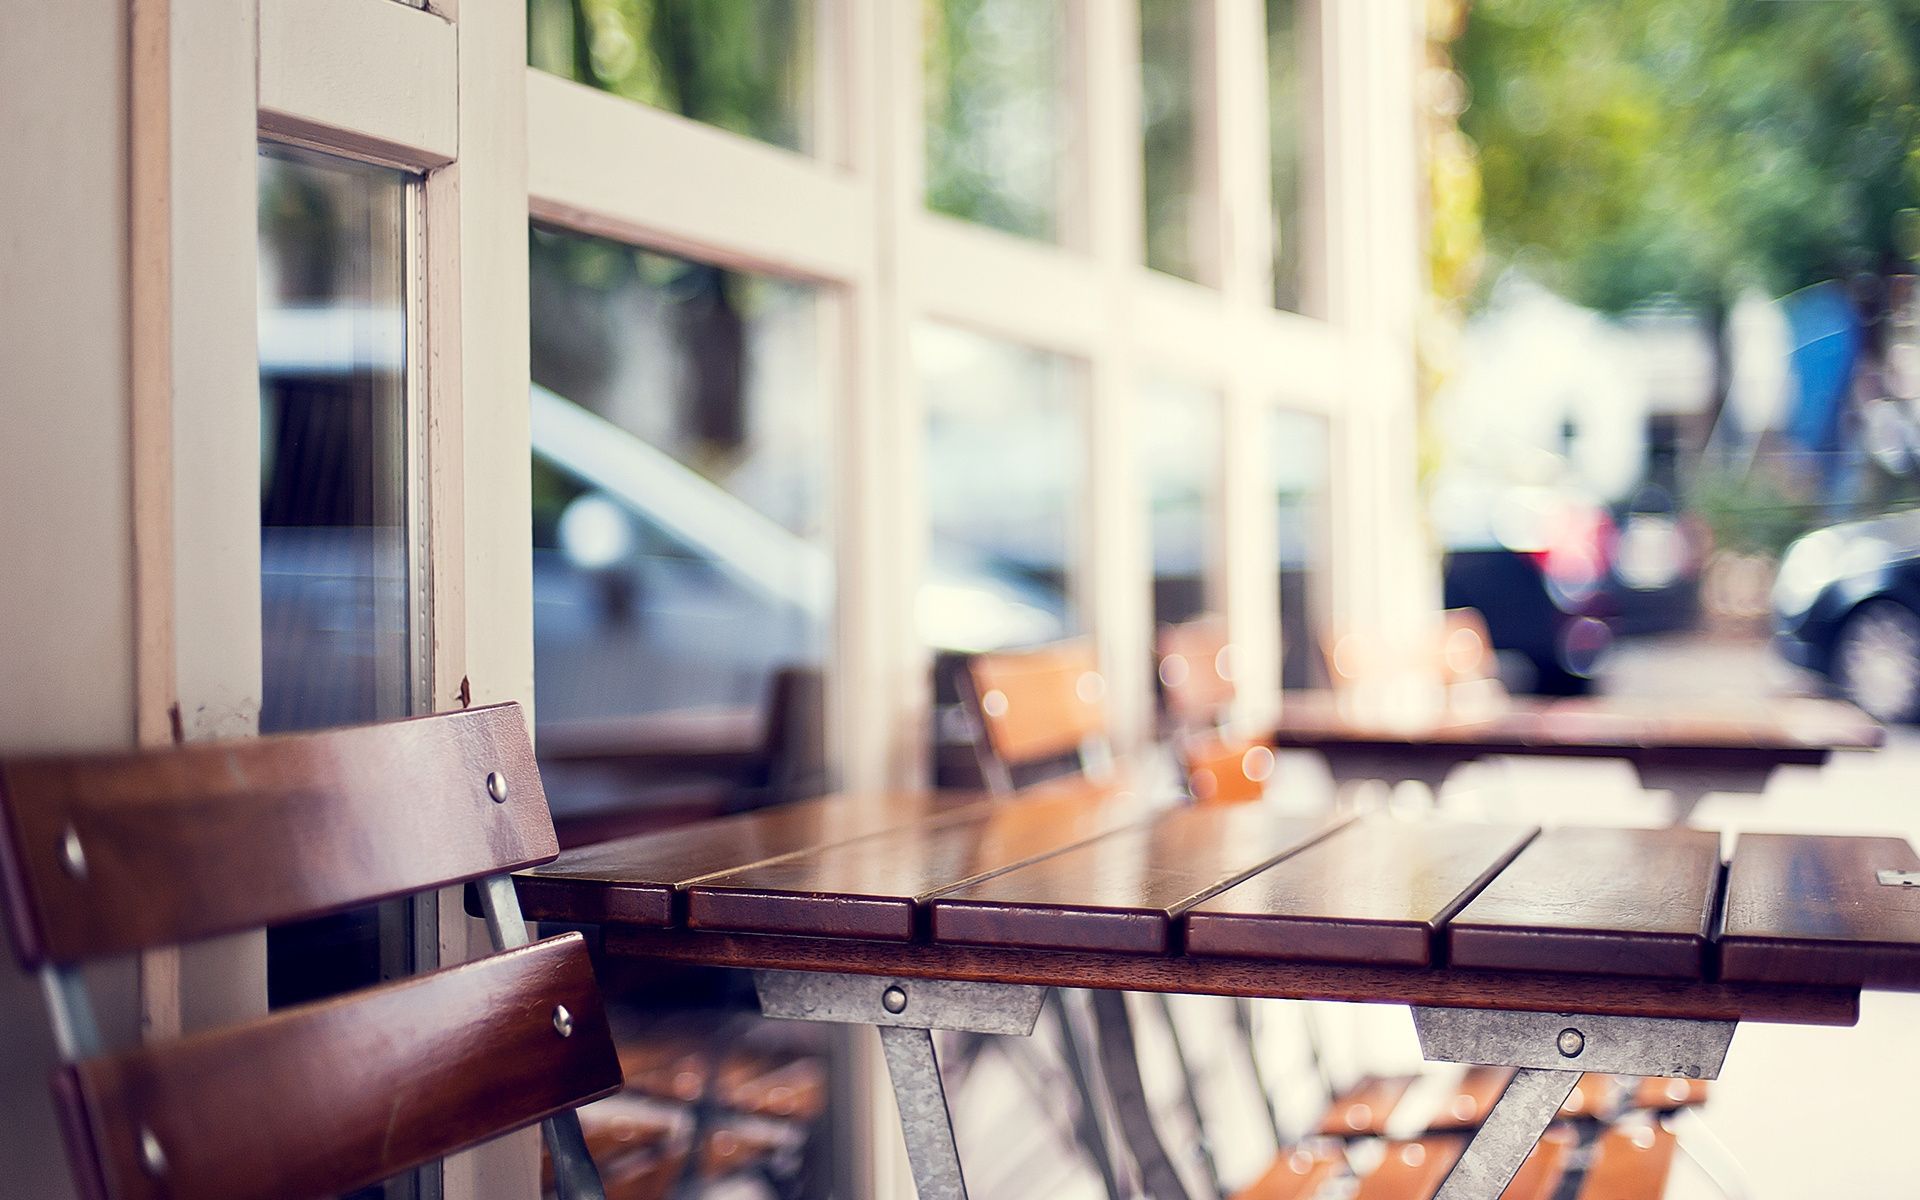 Download Wallpaper 1920x1200 City​​, Cafe, Chair, Table, Blur ...